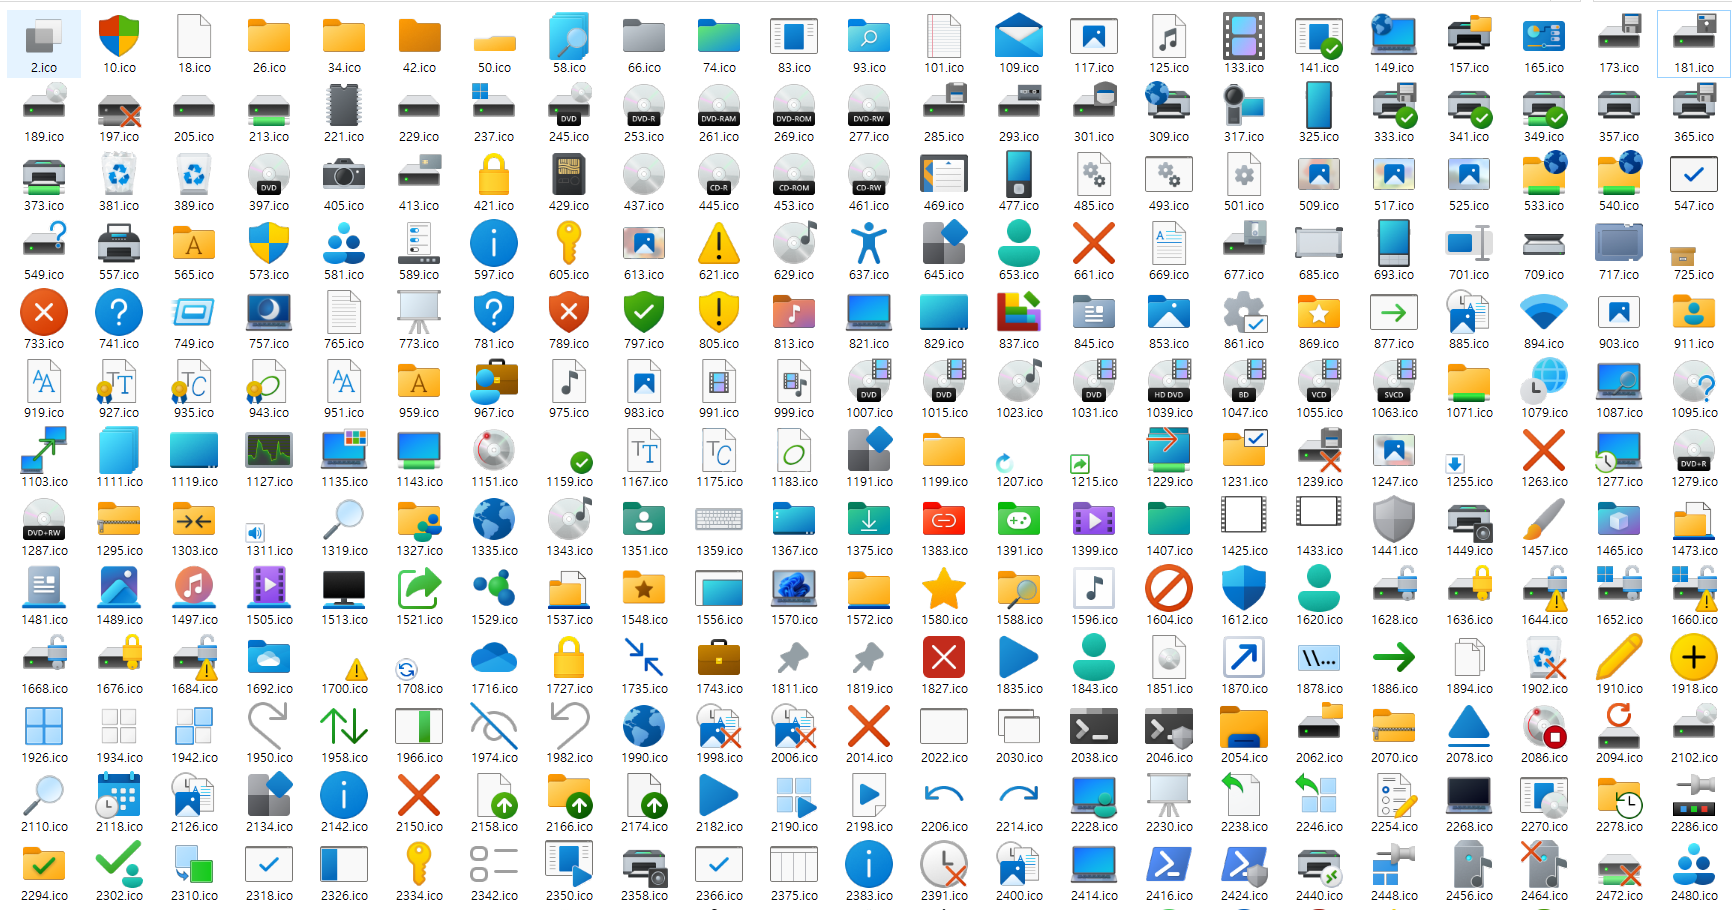 2023-06-20_HLB_New_Icons.png